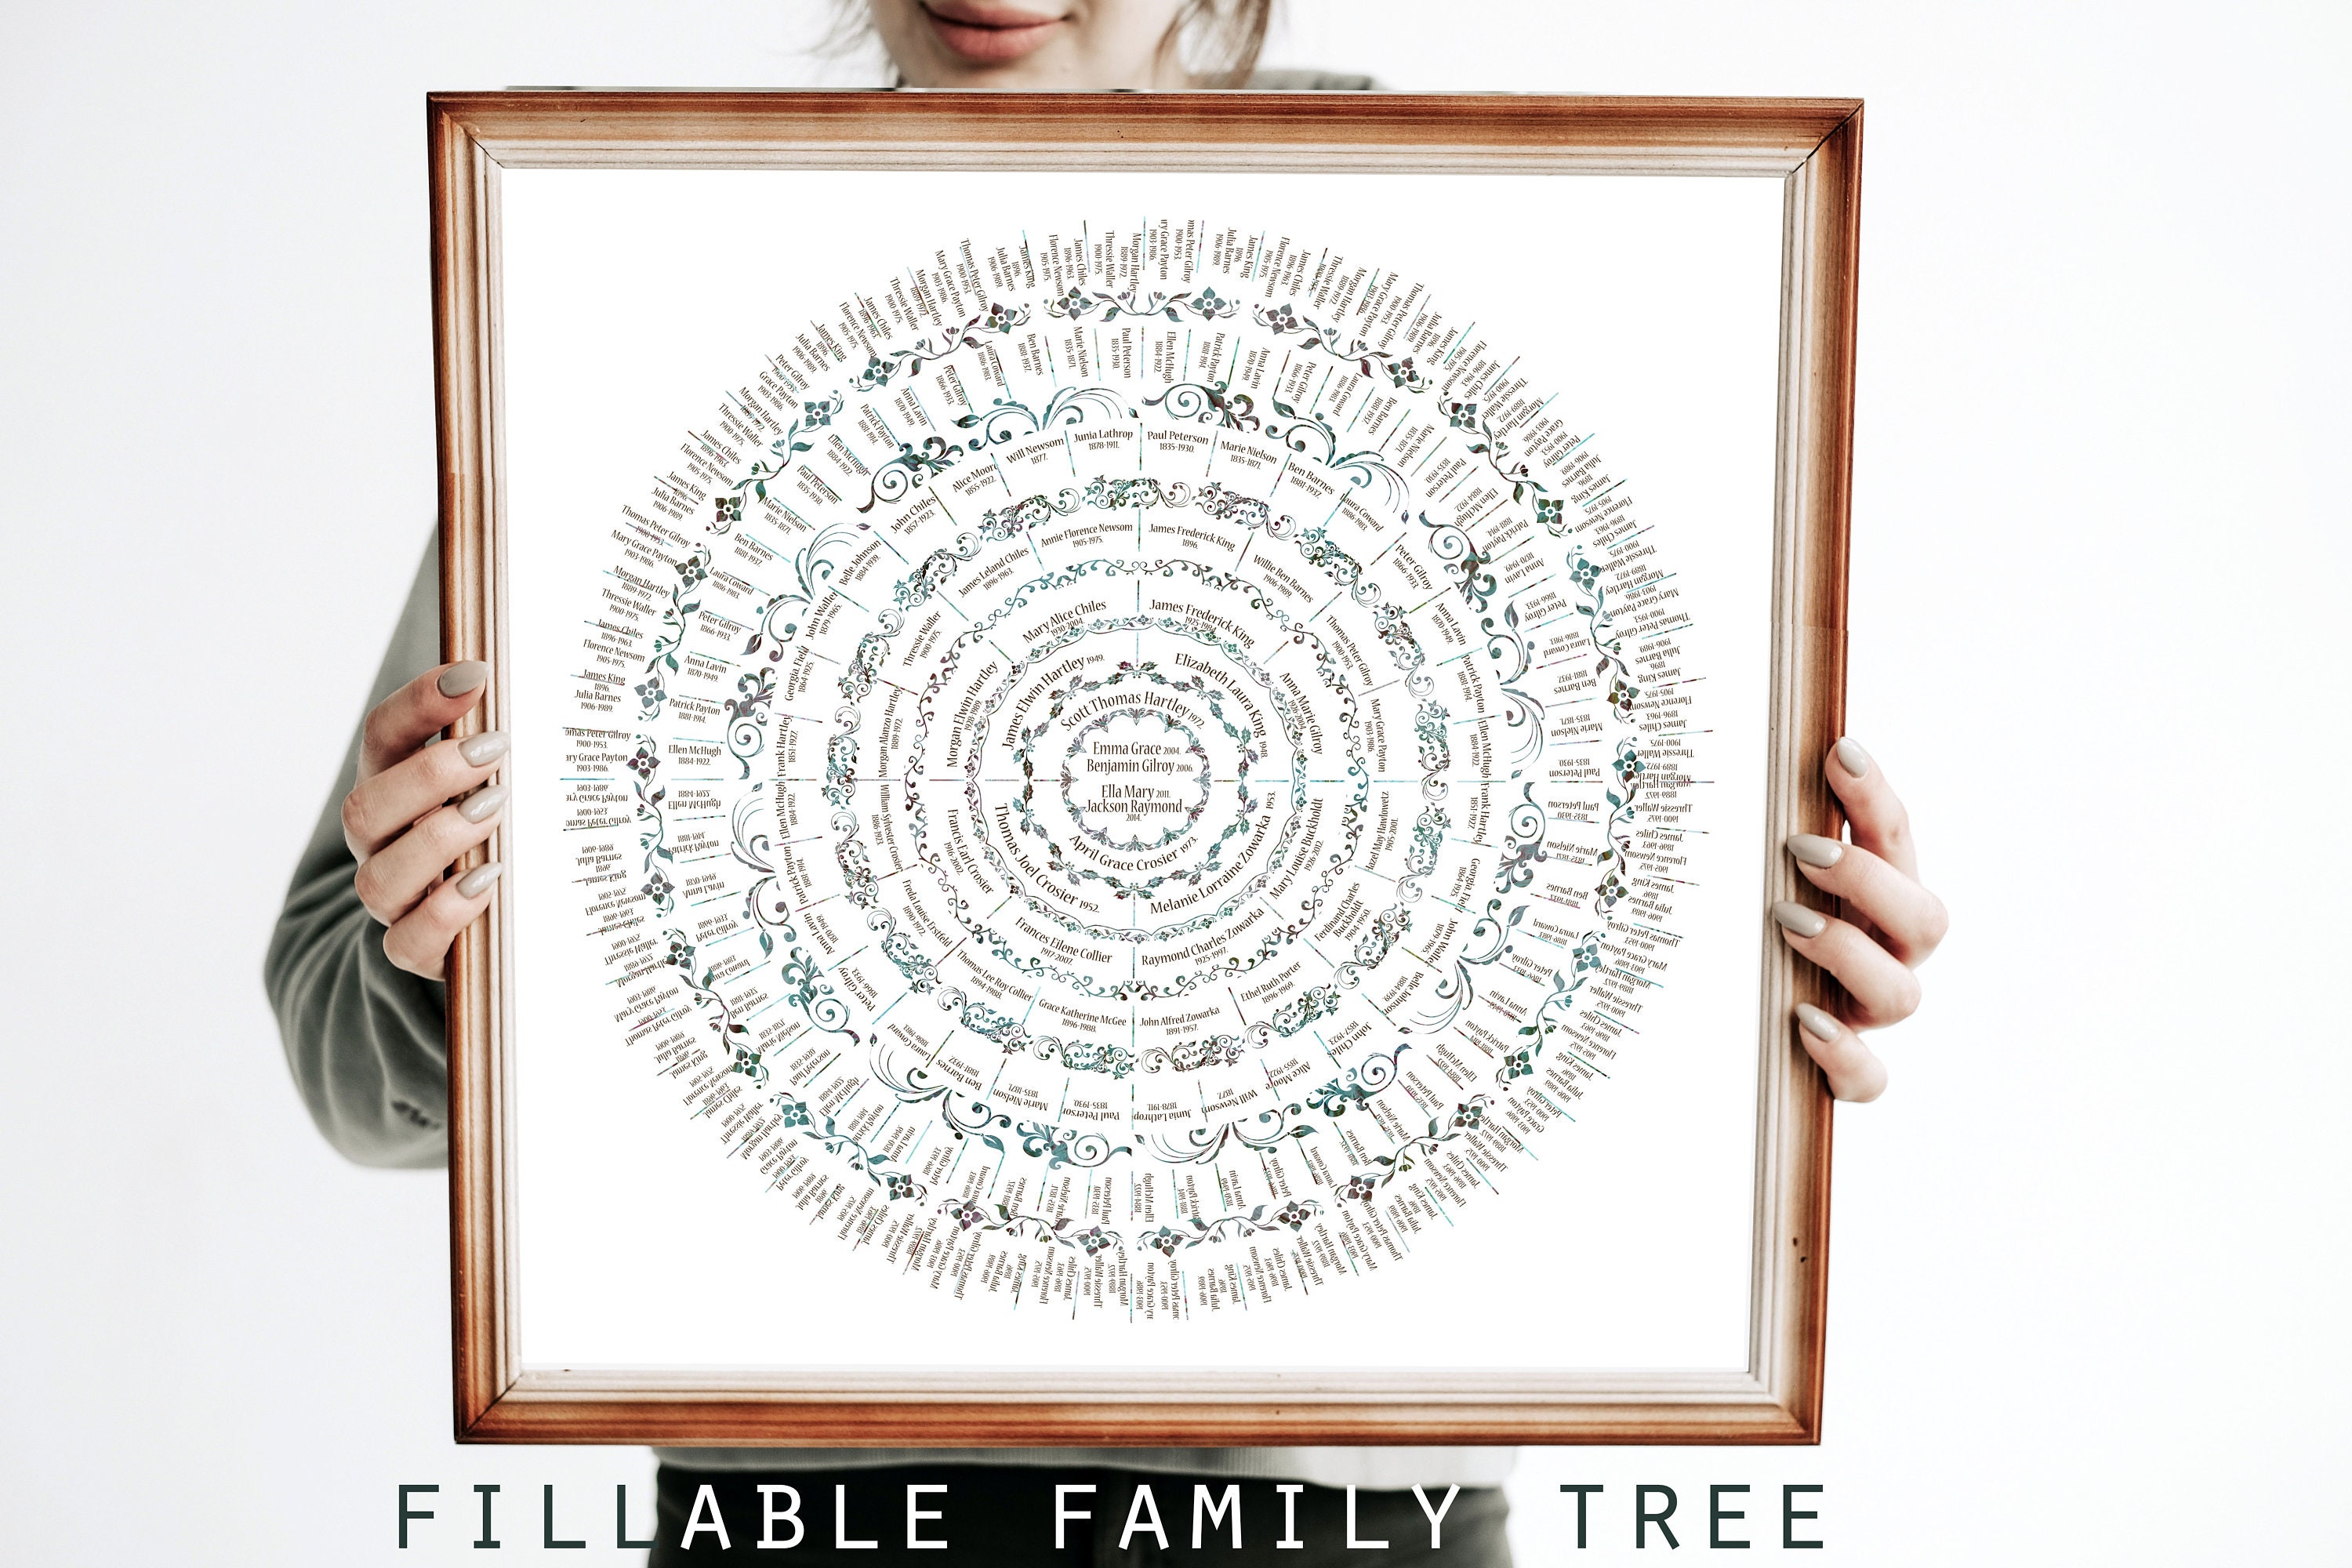 The biggest family tree that I've made, covering the genealogy of